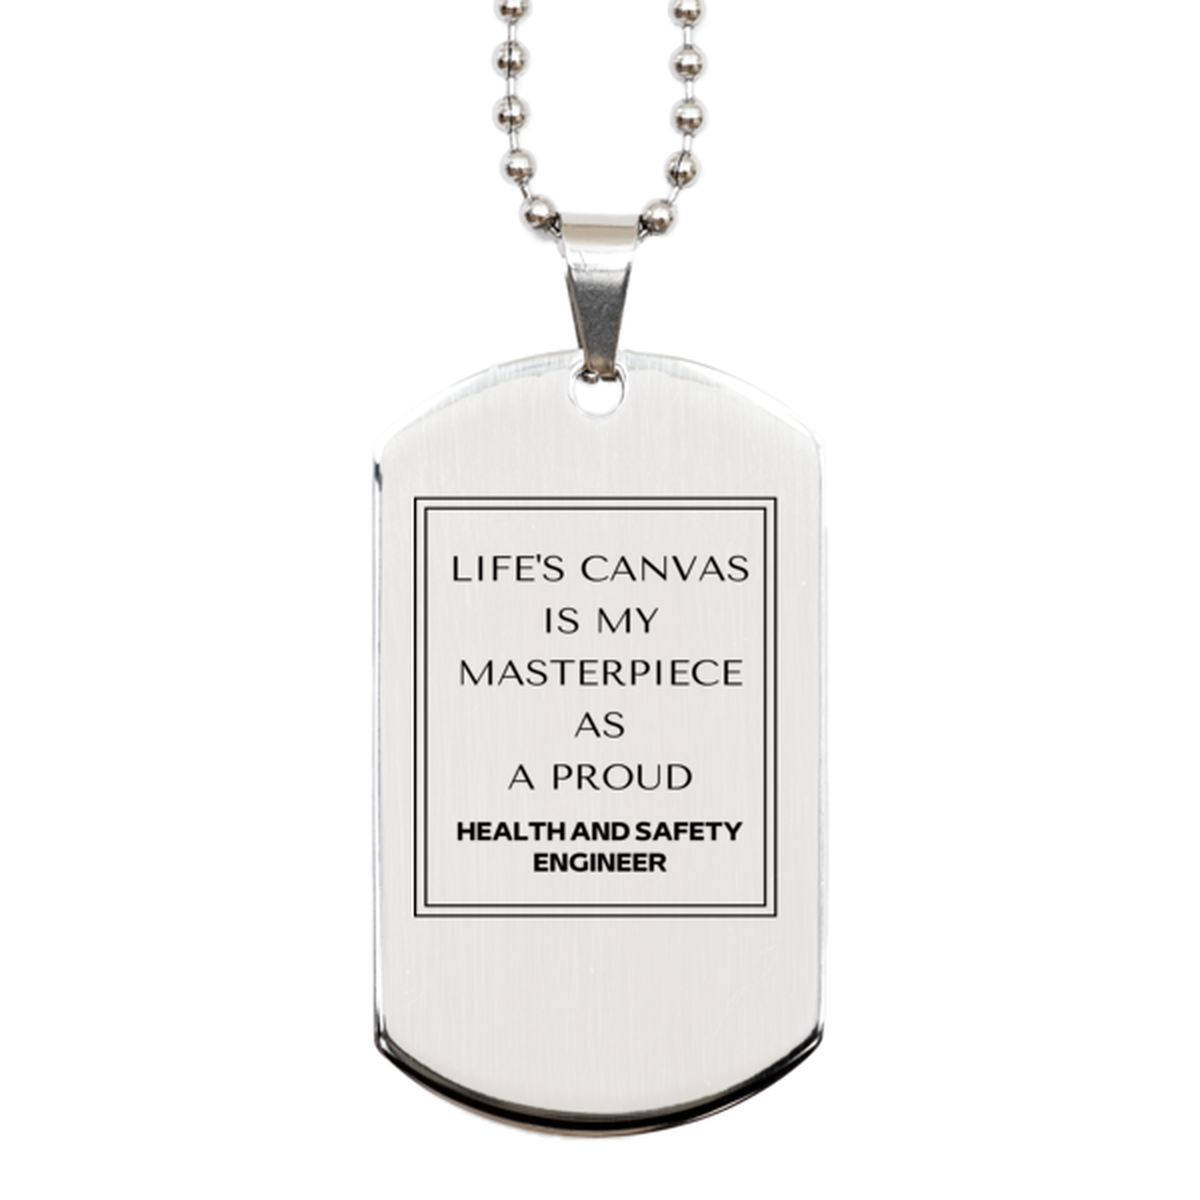 Proud Health and Safety Engineer Gifts, Life's canvas is my masterpiece, Epic Birthday Christmas Unique Silver Dog Tag For Health and Safety Engineer, Coworkers, Men, Women, Friends